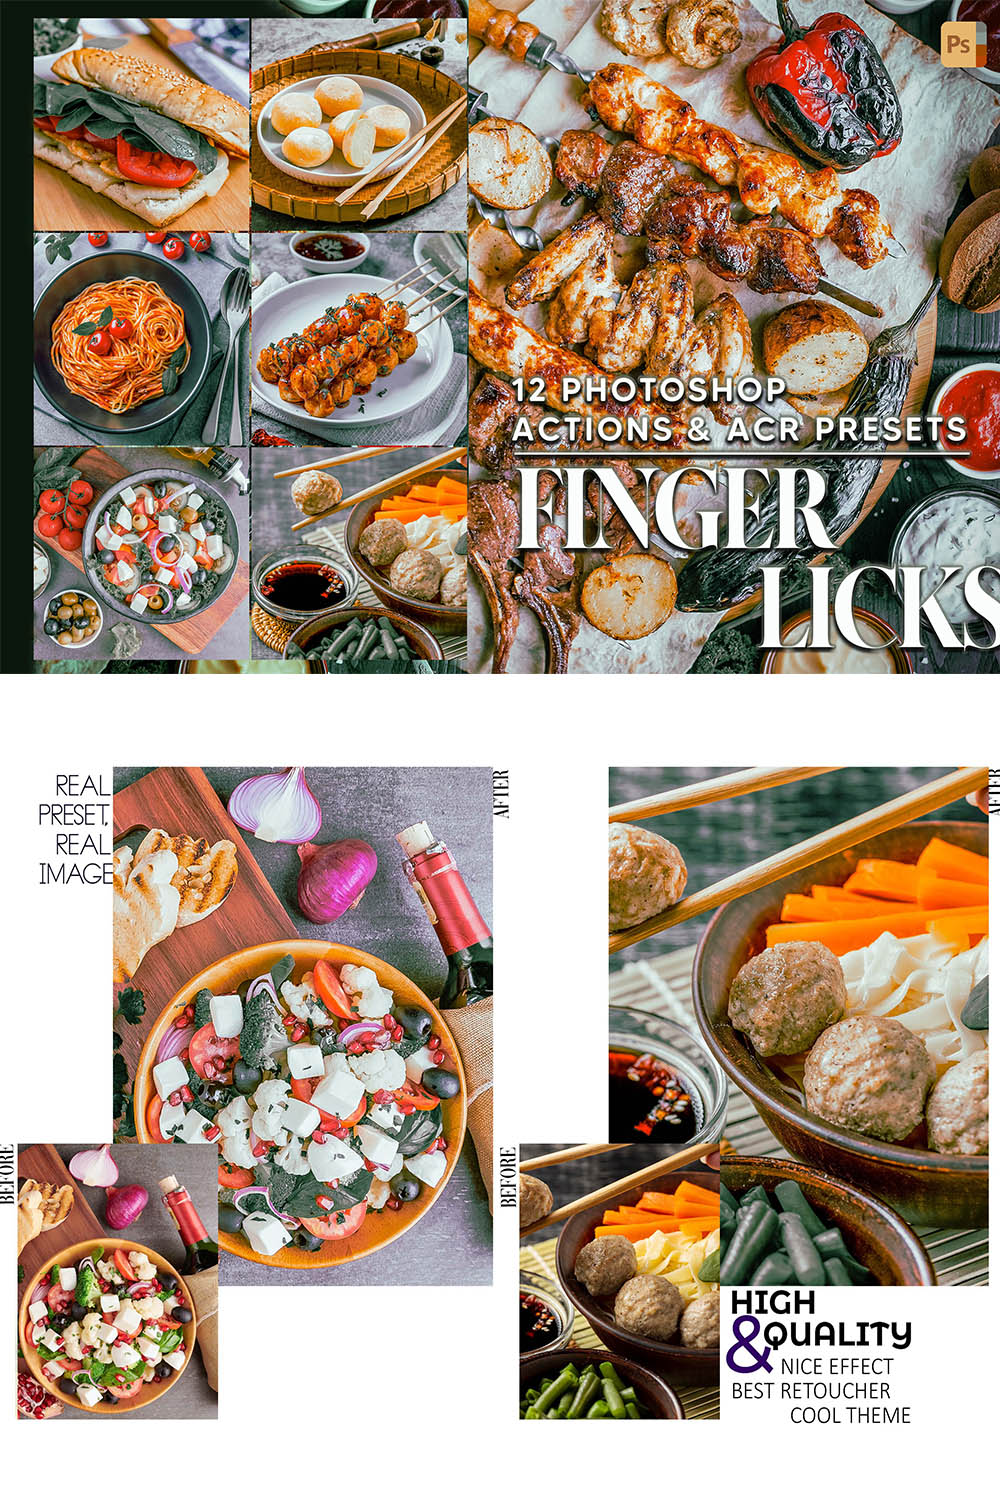 12 Photoshop Actions, Finger Licks Ps Action, Food Bright ACR Preset, Vibrant Ps Filter, Portrait And Lifestyle Theme For Instagram, Blogger pinterest preview image.